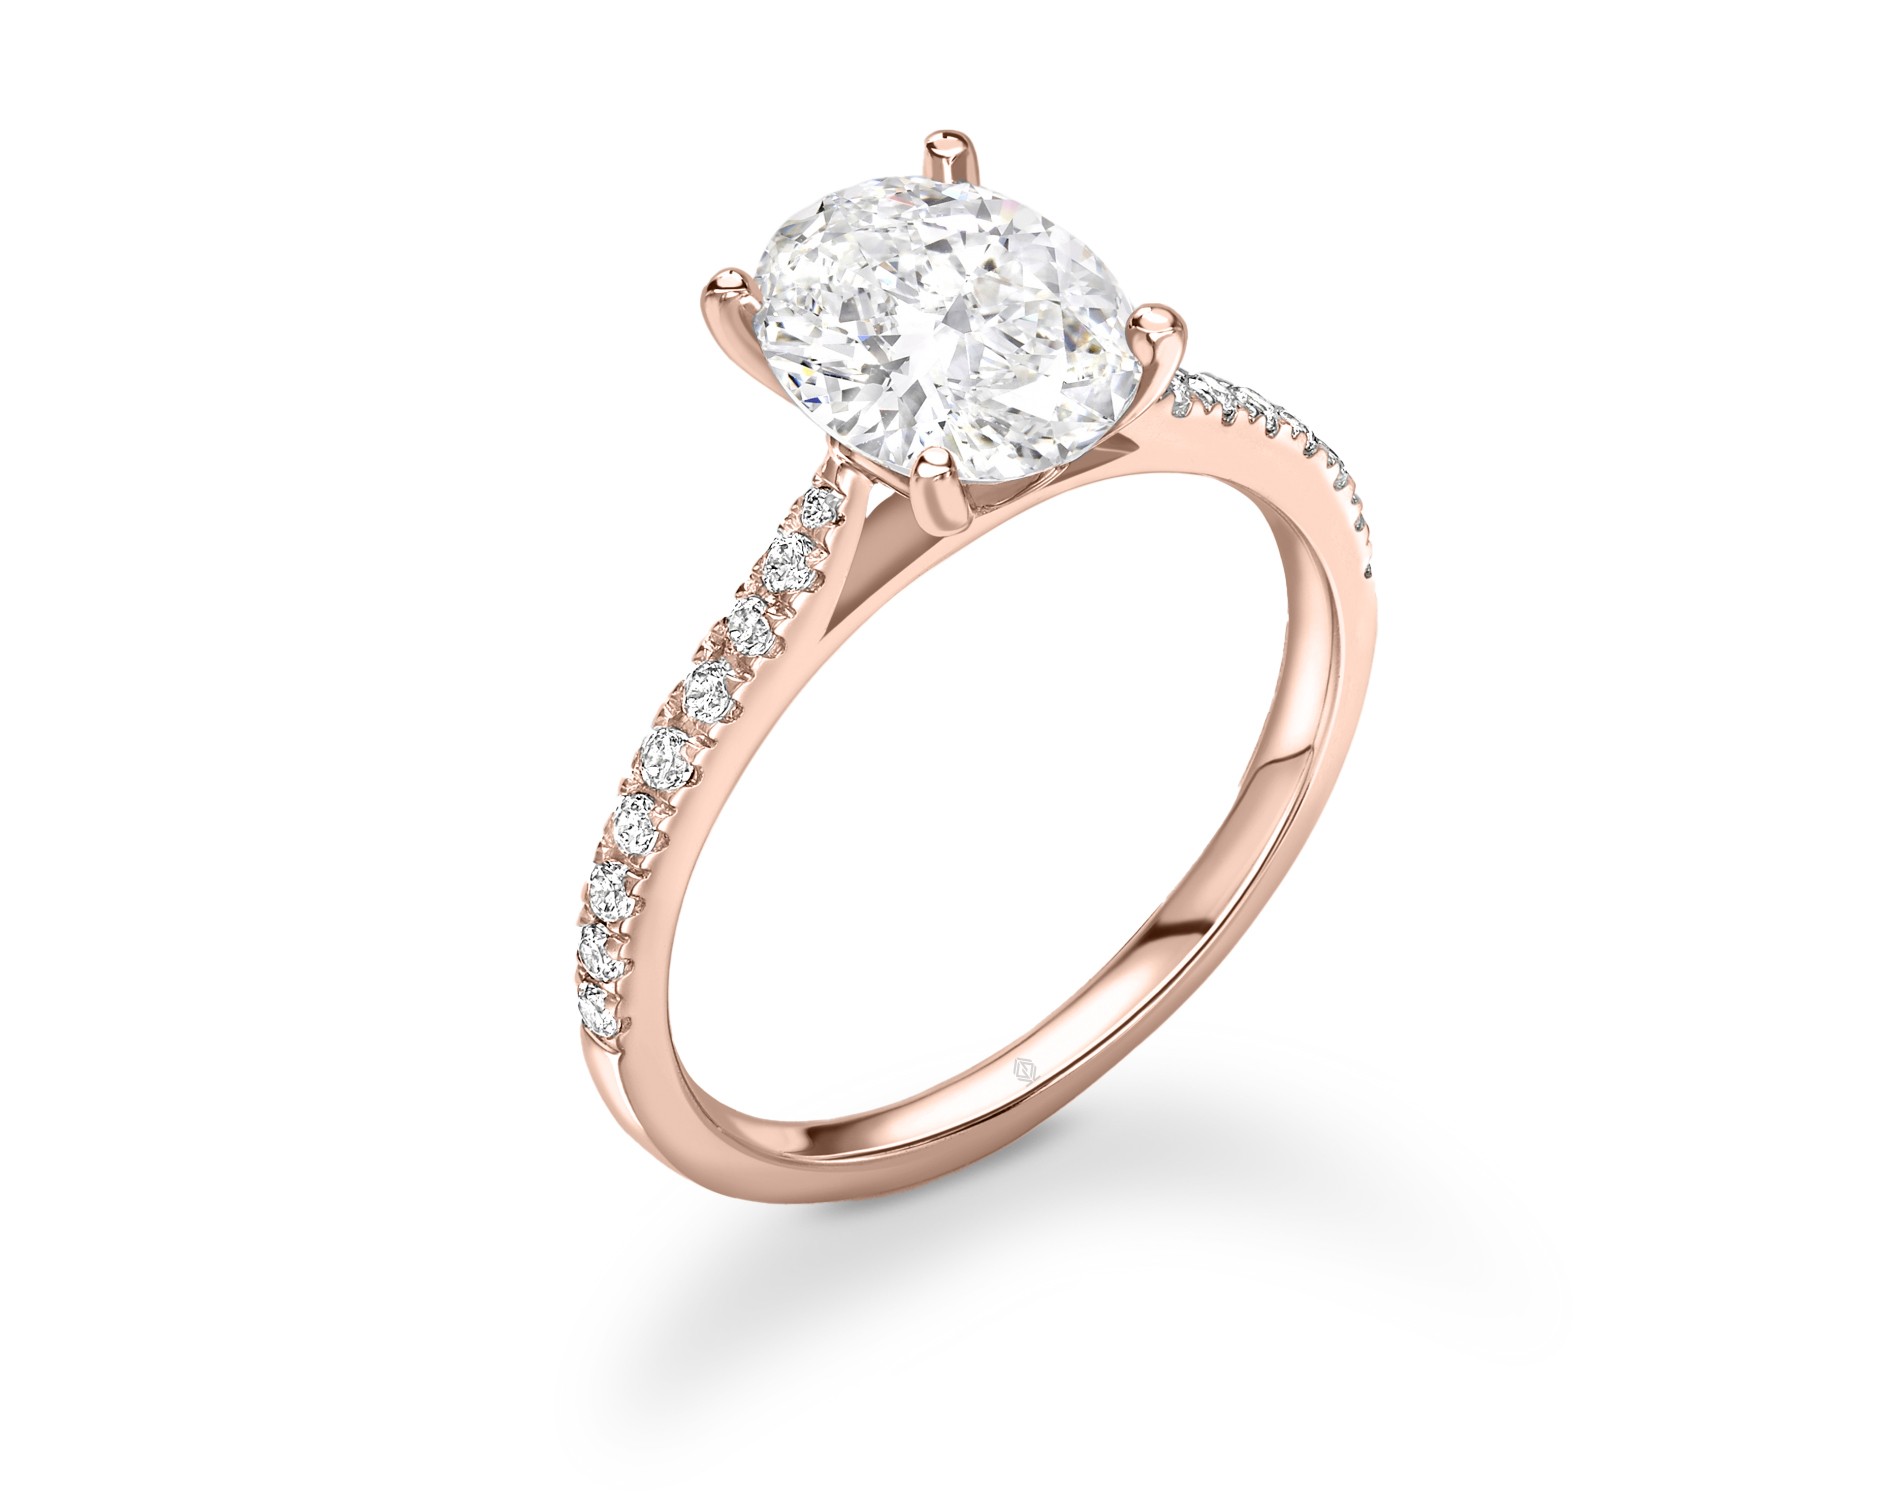 18K ROSE GOLD OVAL CUT 4 PRONGS DIAMOND ENGAGEMENT RING WITH SIDE STONES PAVE SET